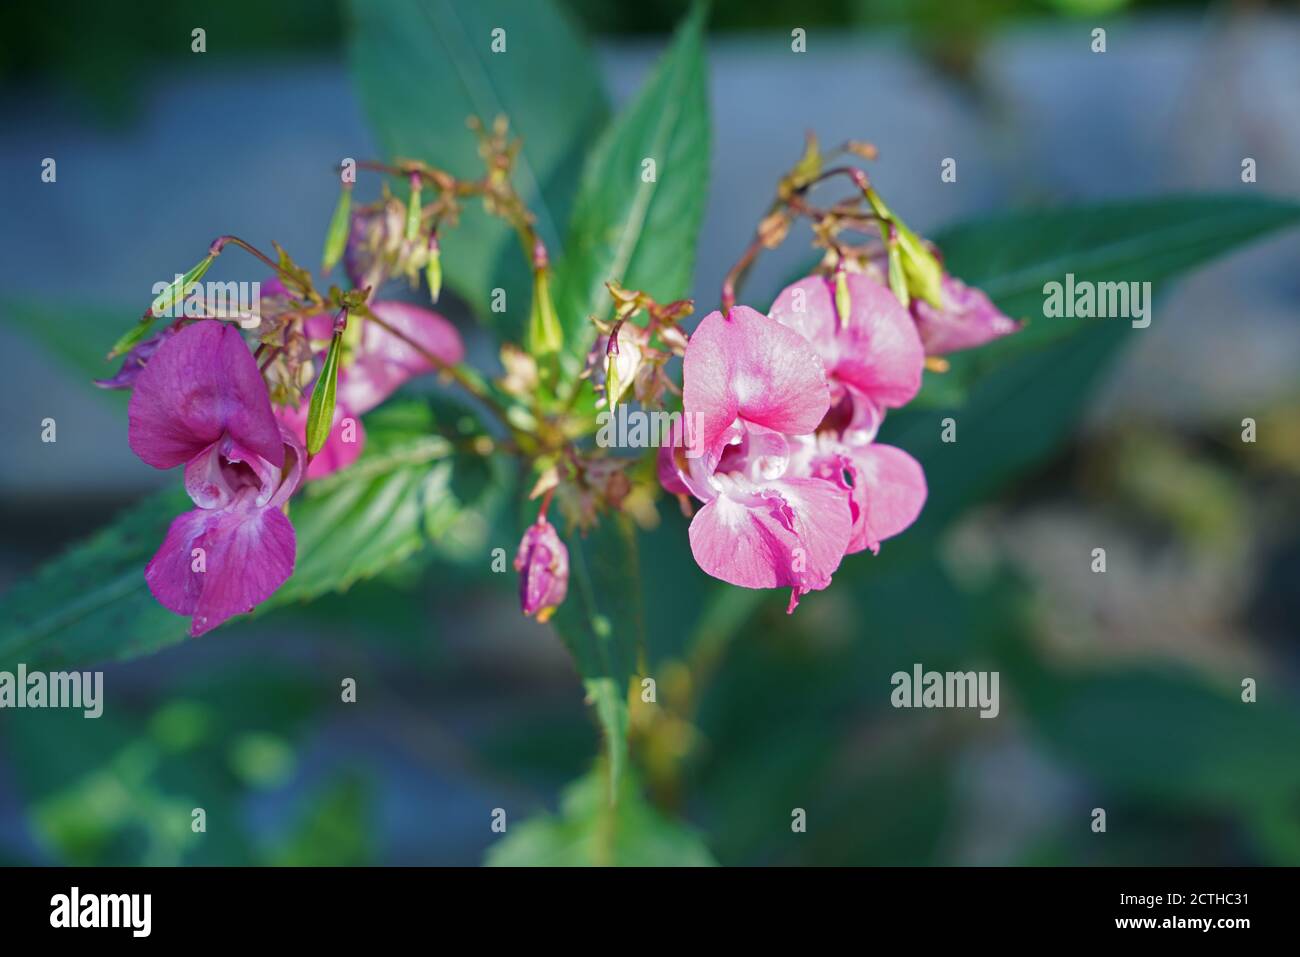 Pink flowering balsam at the edge Stock Photo